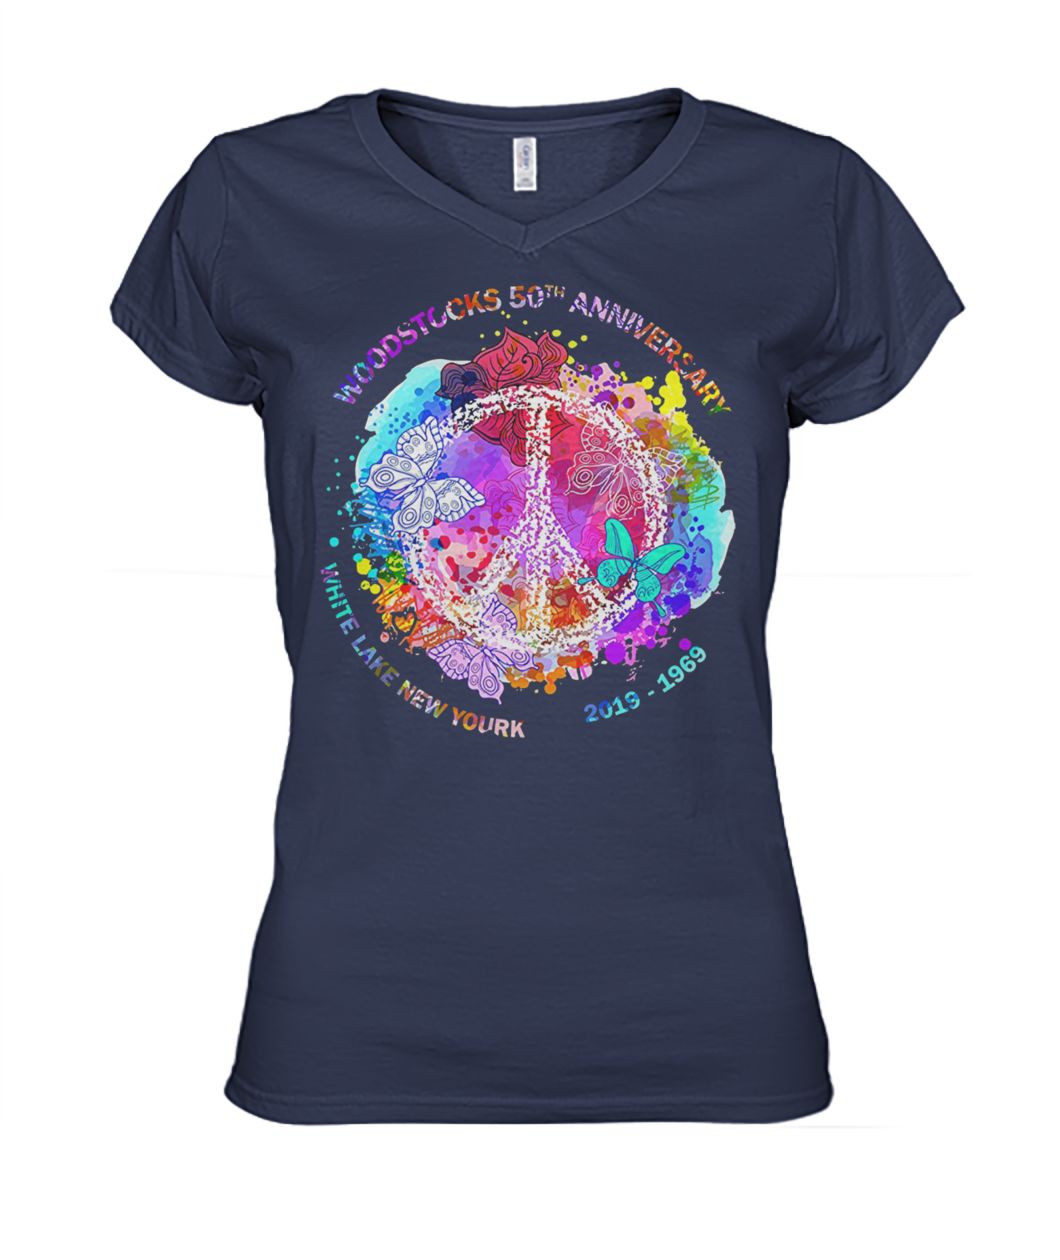 Hippie woodstock 50th anniversary 1969-2019 peace and love women's v-neck